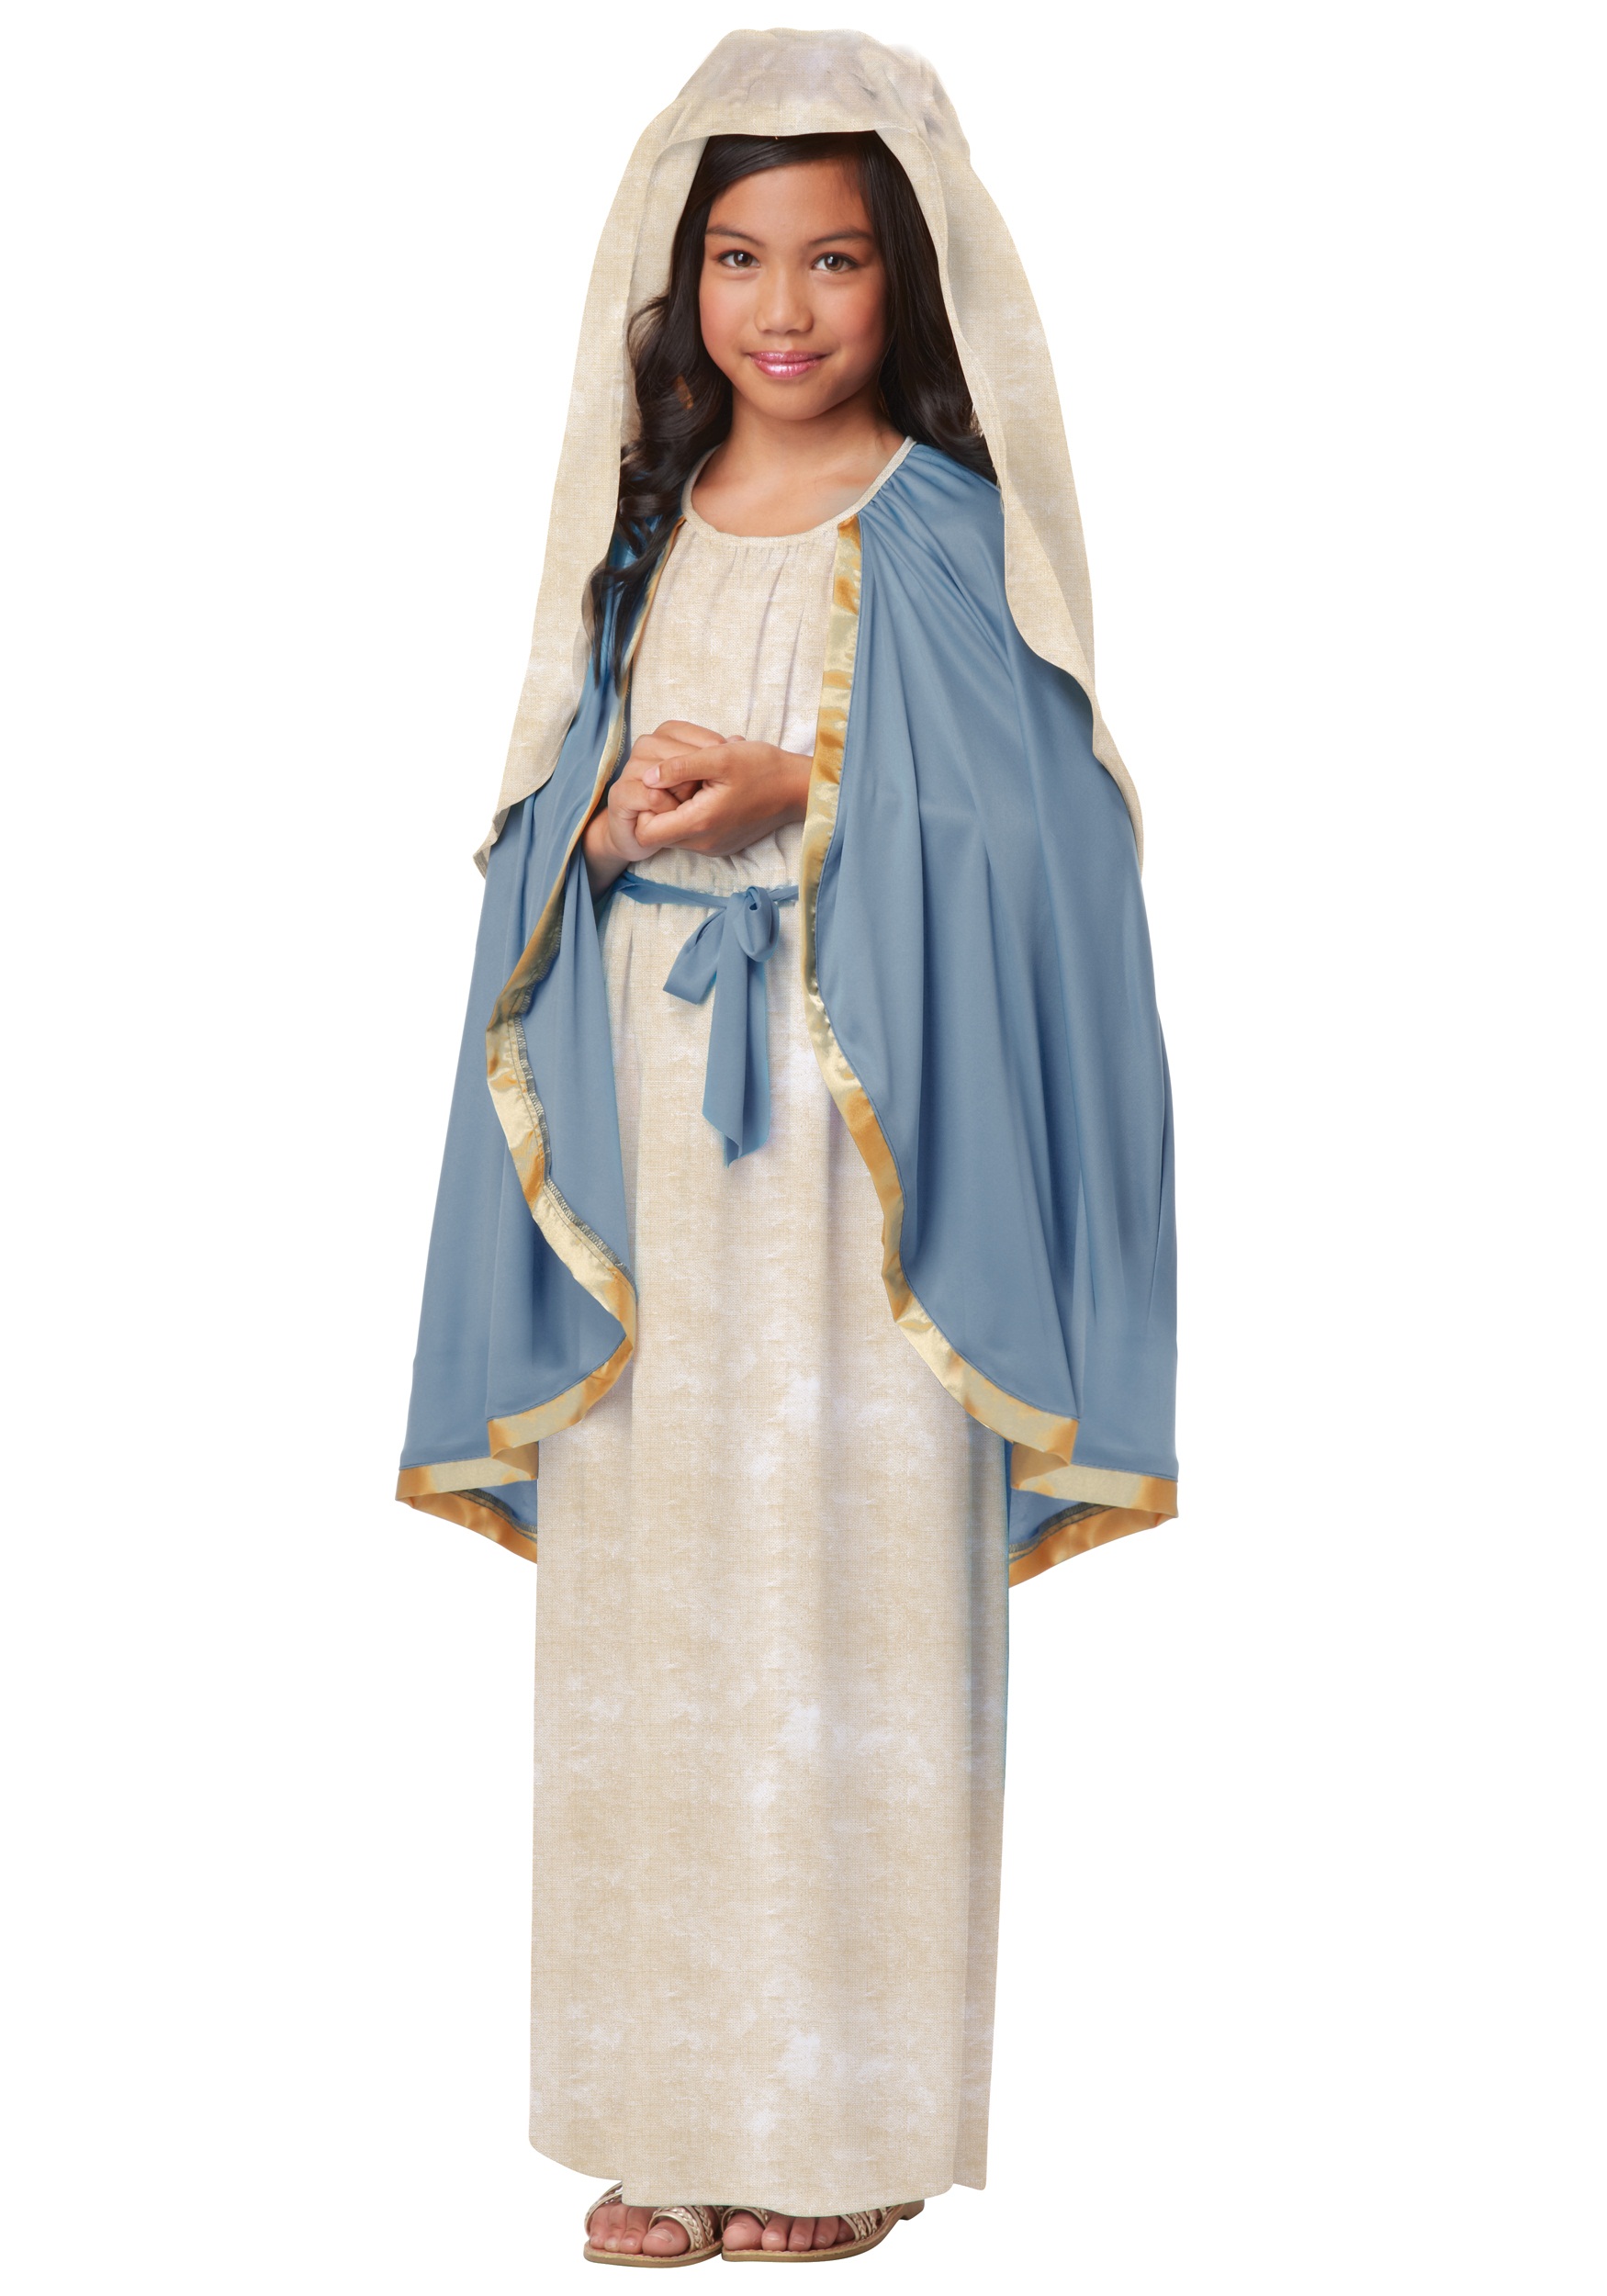 Ladies Virgin Mary Costume Adults Christmas Fancy Dress Womens Nativity Outfit